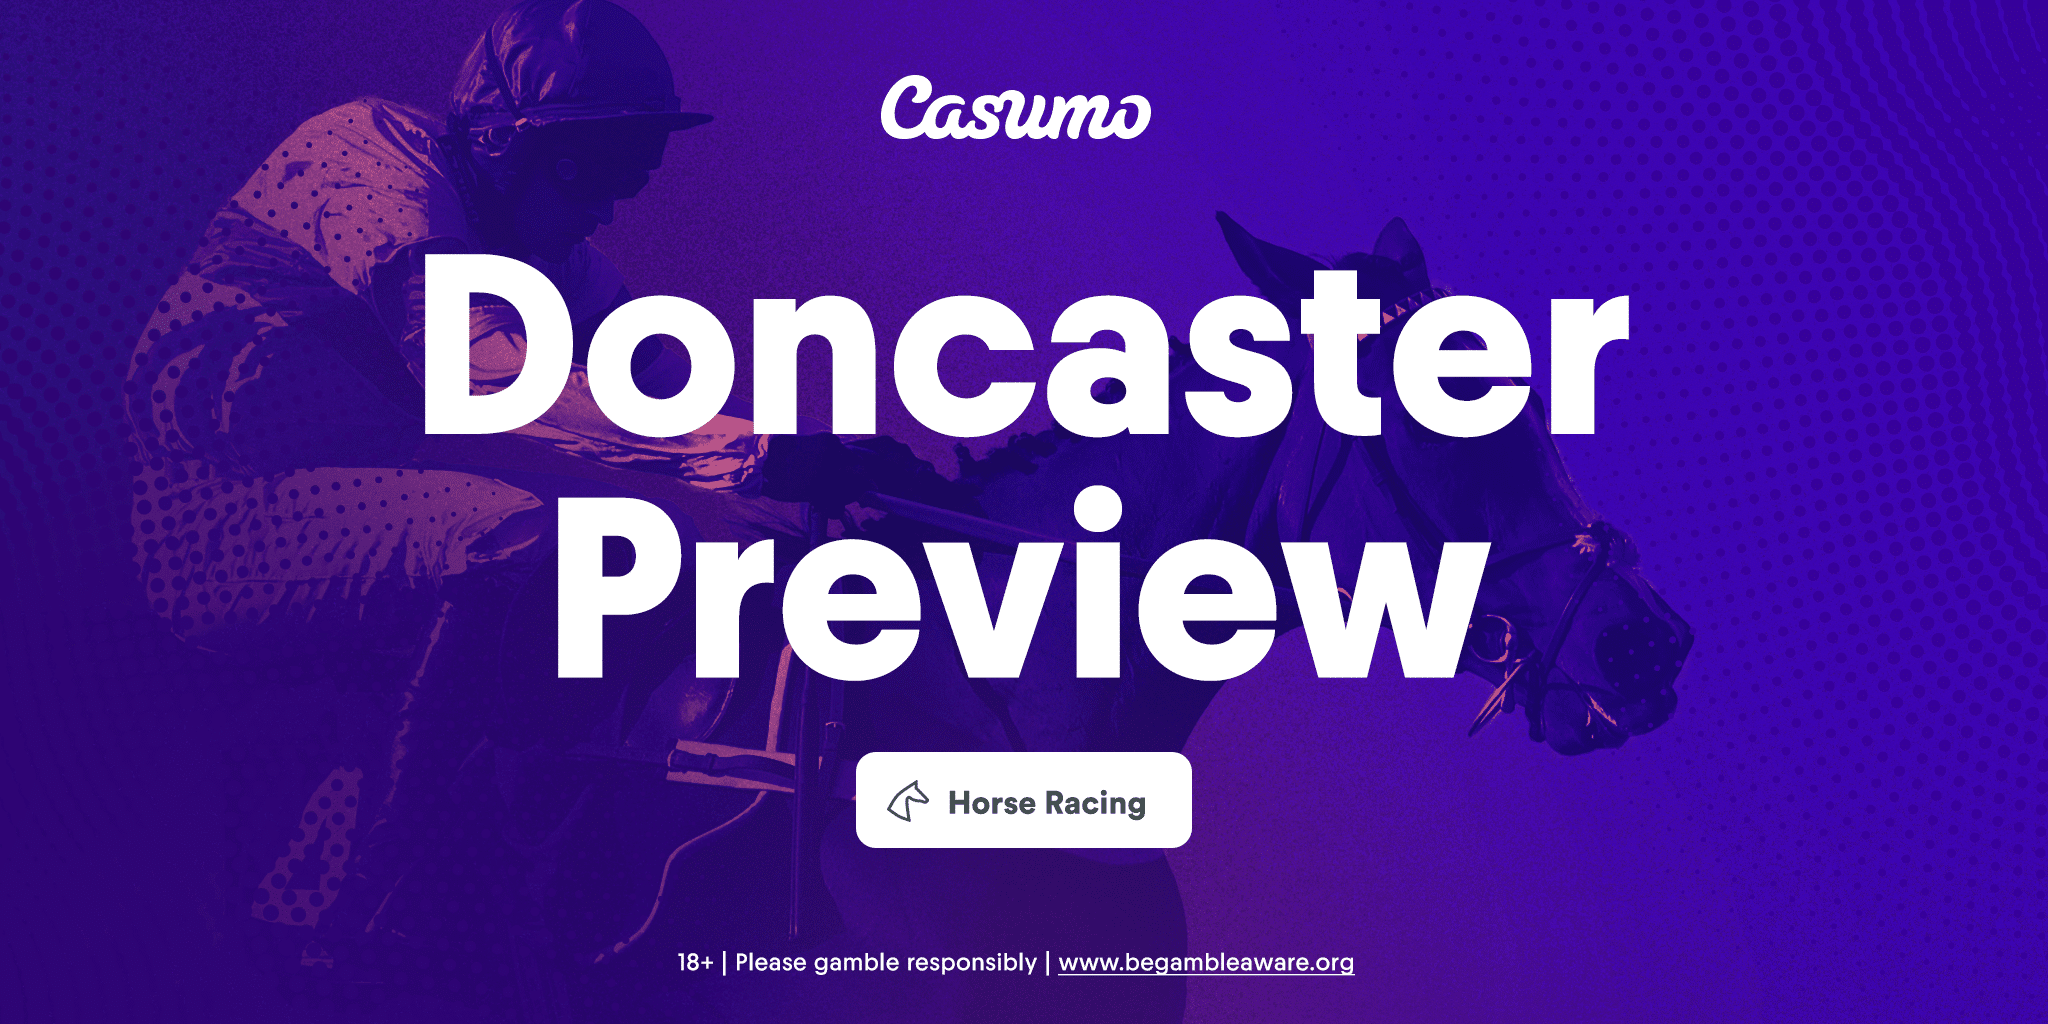 Doncaster preview